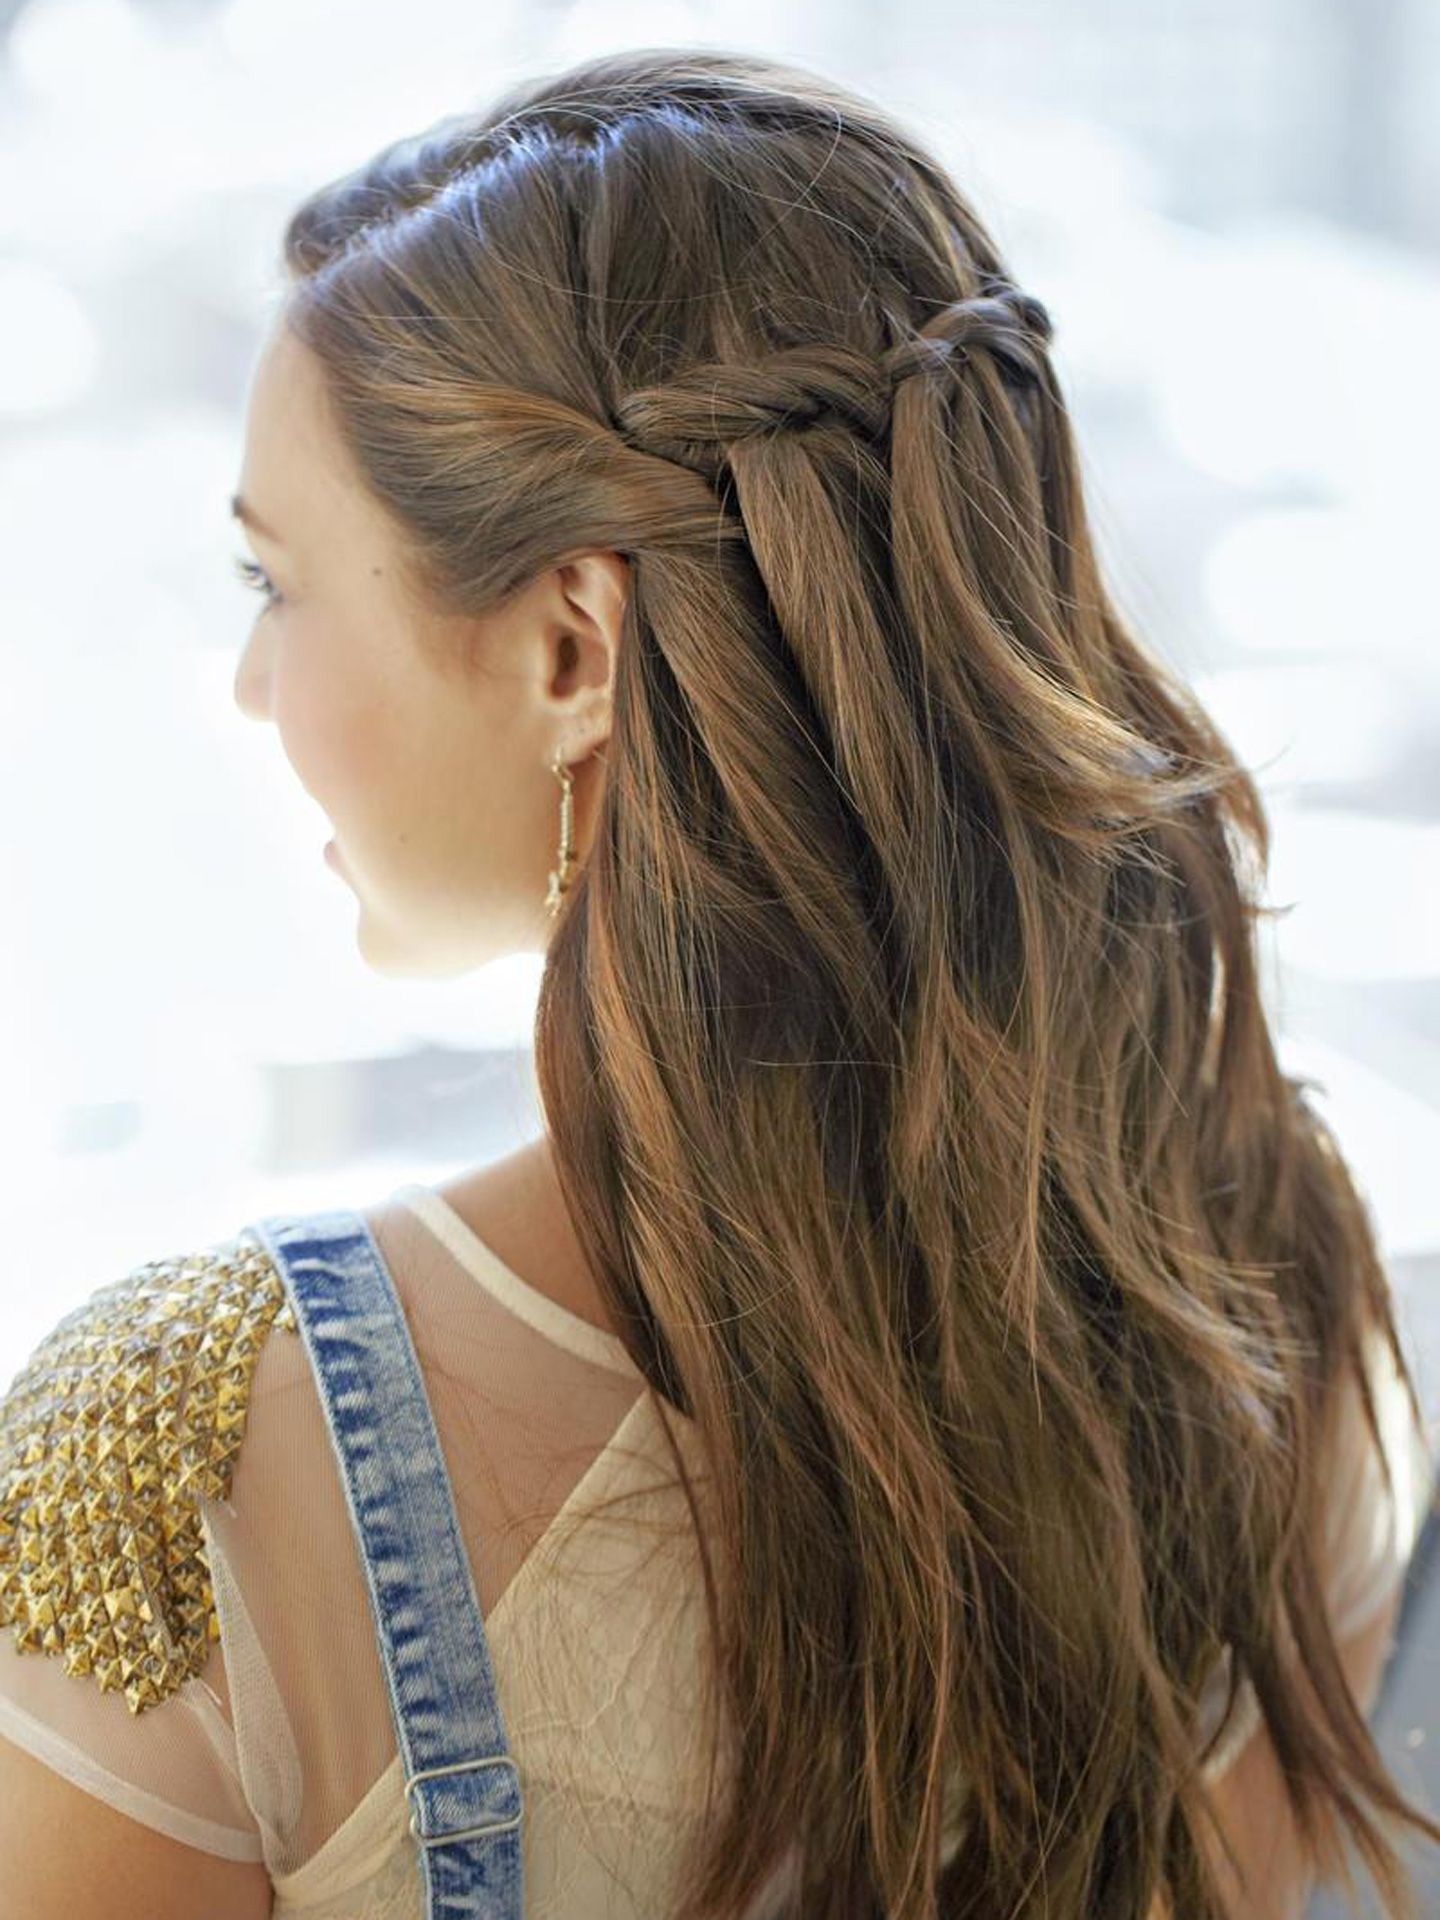 16 Epic New Year's Eve Hairstyle Ideas - Hair Inspiration for NYE 2018